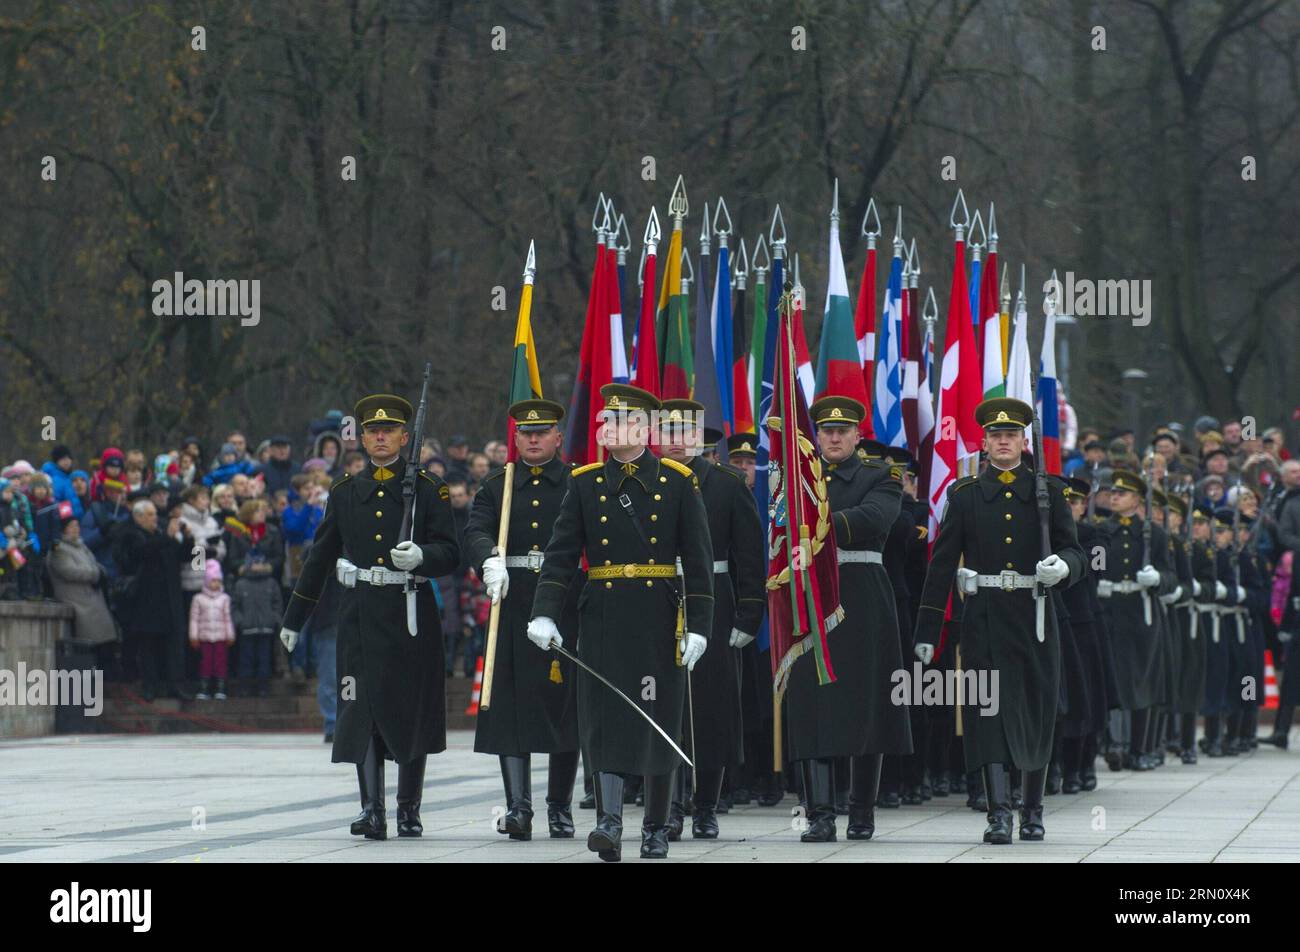 (141123) -- VILNIUS, Nov. 23, 2014 -- Guard of honor carry the flags of NATO member countries on the celebration in Vilnius, Lithuania, on Nov. 23, 2014. Lithuanian armed forces and troops of some NATO member countries held a gala with formation on Sunday to celebrate the Armed Forces Day. Lithuania s first decree on establishing armed forces was approved on Nov. 23, 1918, which became the Armed Forces Day of the Baltic country. )(bxq) LITHUANIA-VILNIUS-ARMED FORCES DAY AlfredasxPliadis PUBLICATIONxNOTxINxCHN   Vilnius Nov 23 2014 Guard of HONOR Carry The Flags of NATO member Countries ON The Stock Photo